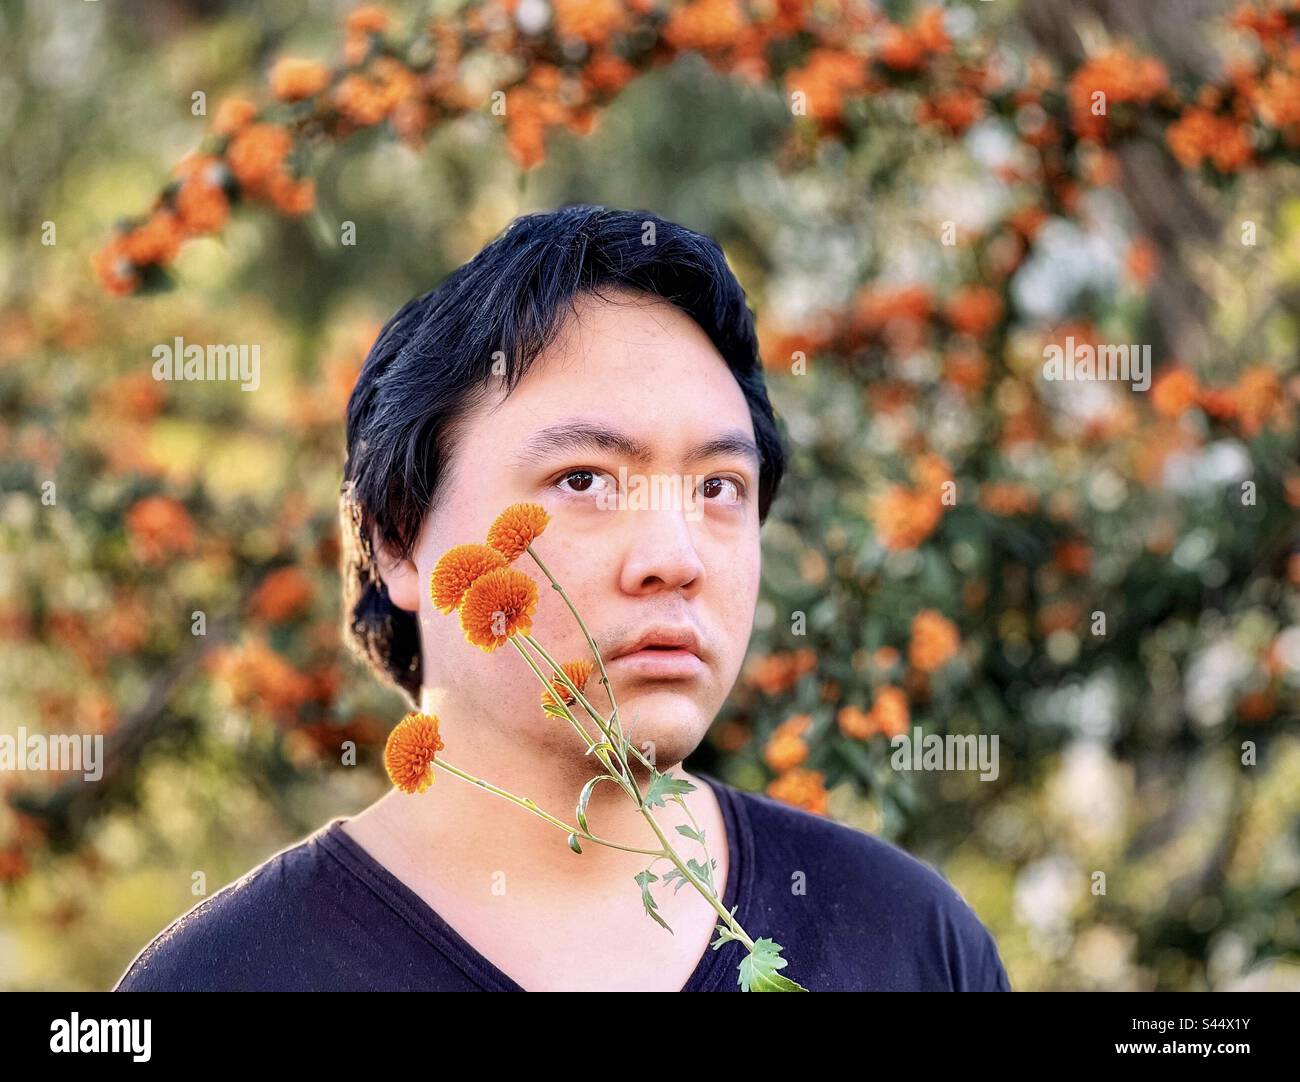 Portrait of young Asian man holding orange mums flowers against orange Cotoneaster berry trees. Focus on foreground. Autumn themes. Stock Photo